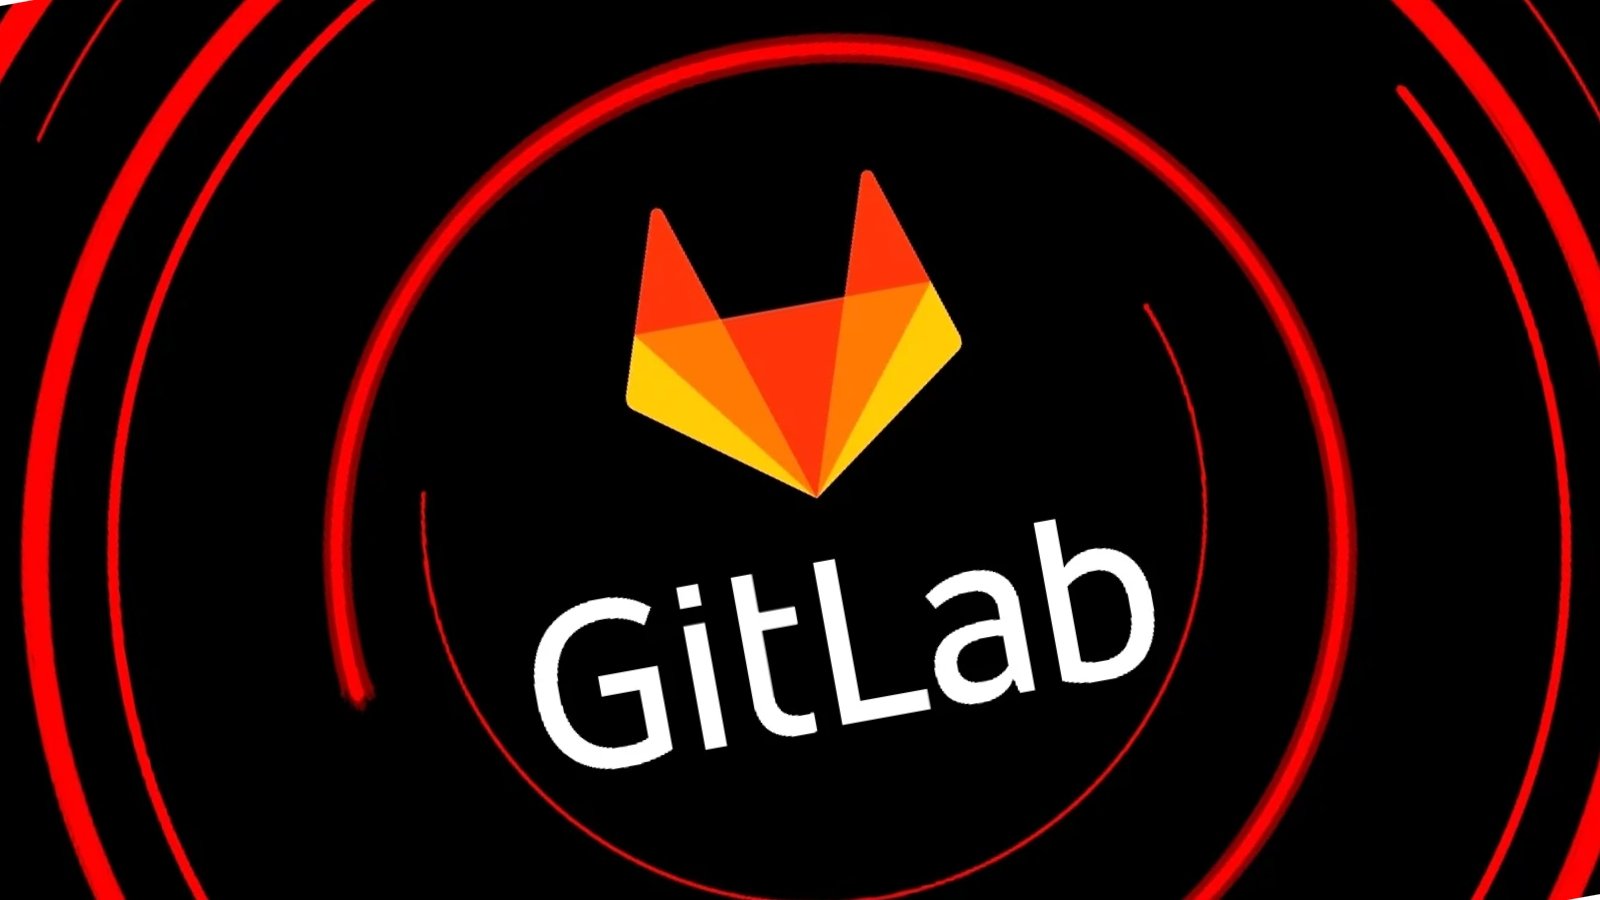 high-severity-gitlab-flaw-lets-attackers-take-over-accounts